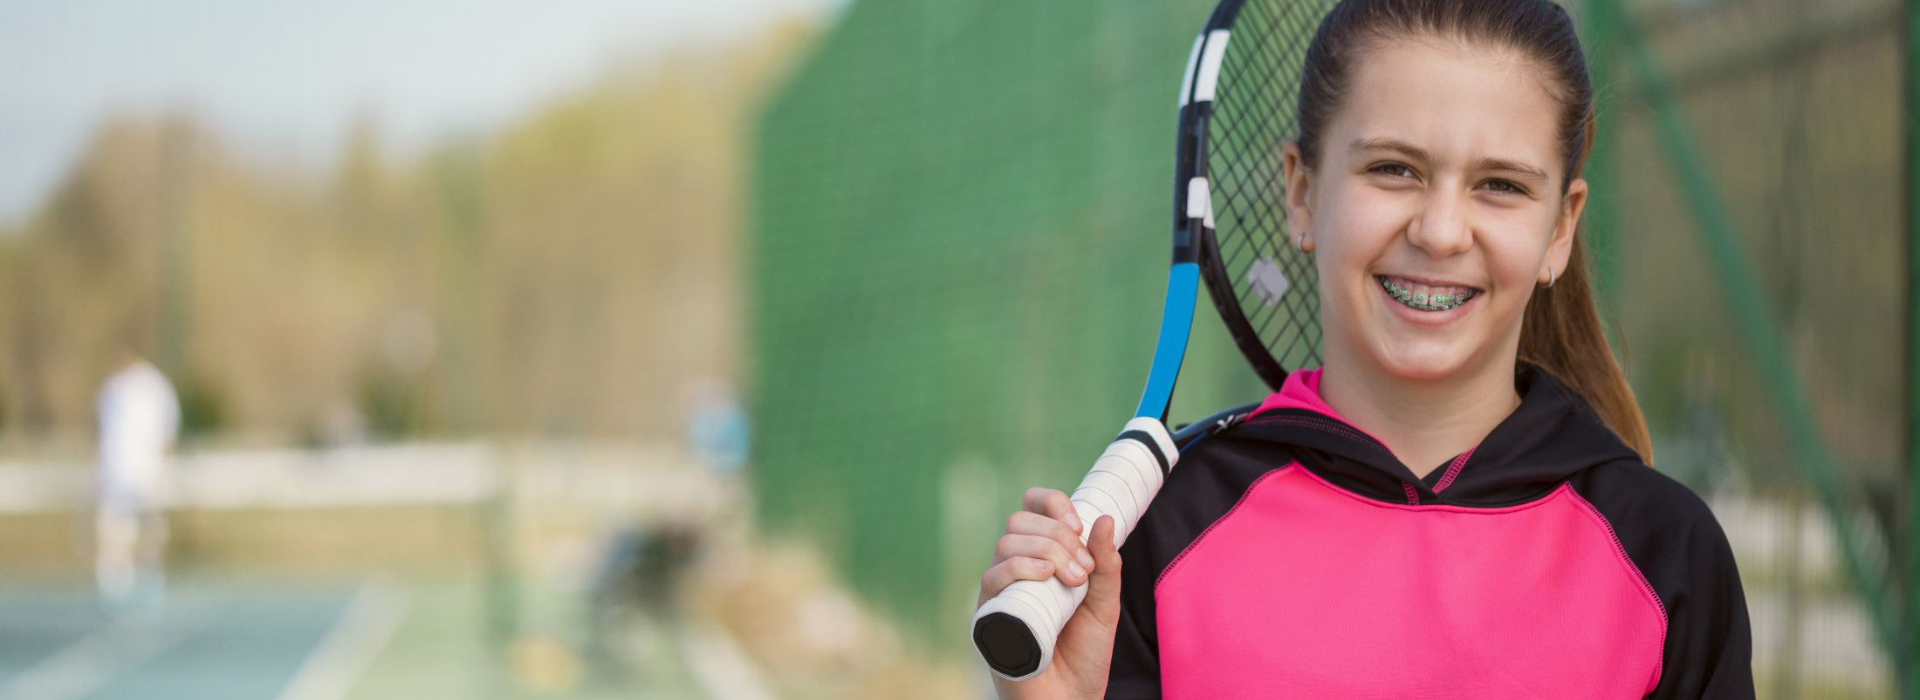 5 Tips for Protecting Braces While Playing Sports